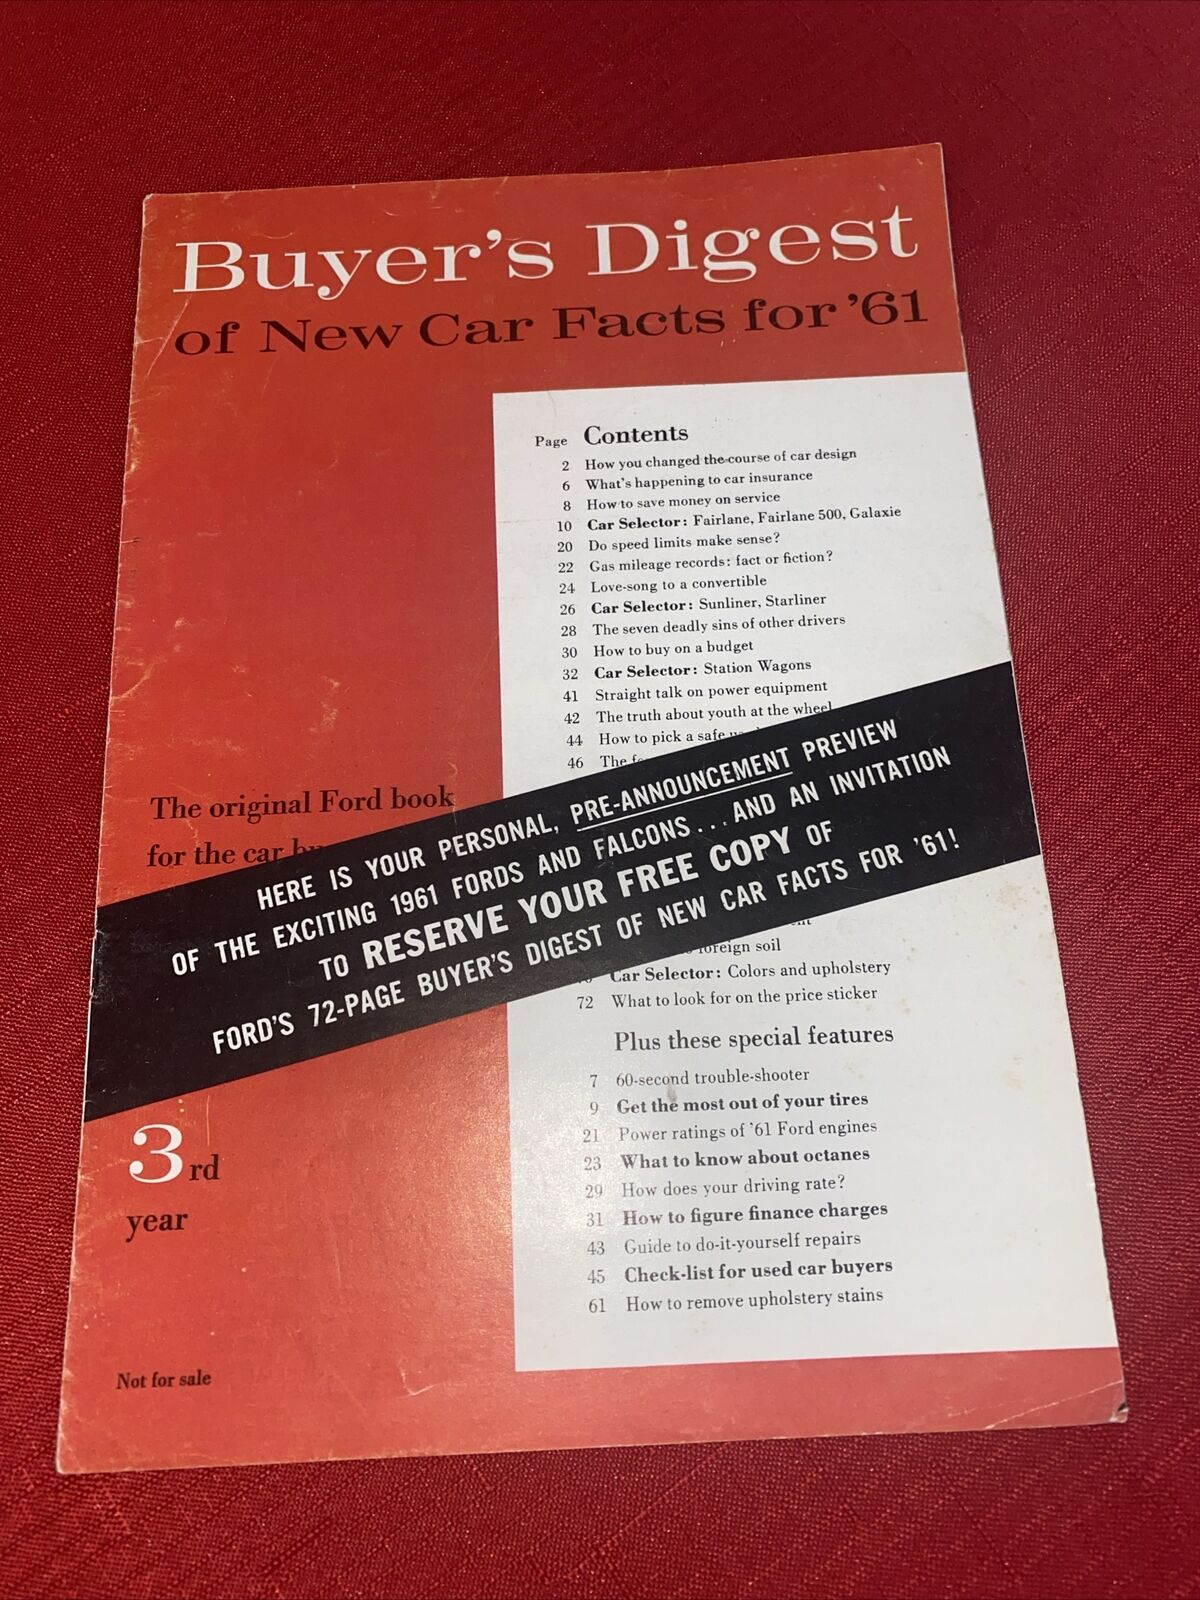 1961 Ford Buyers Digest New car facts Preview Guide